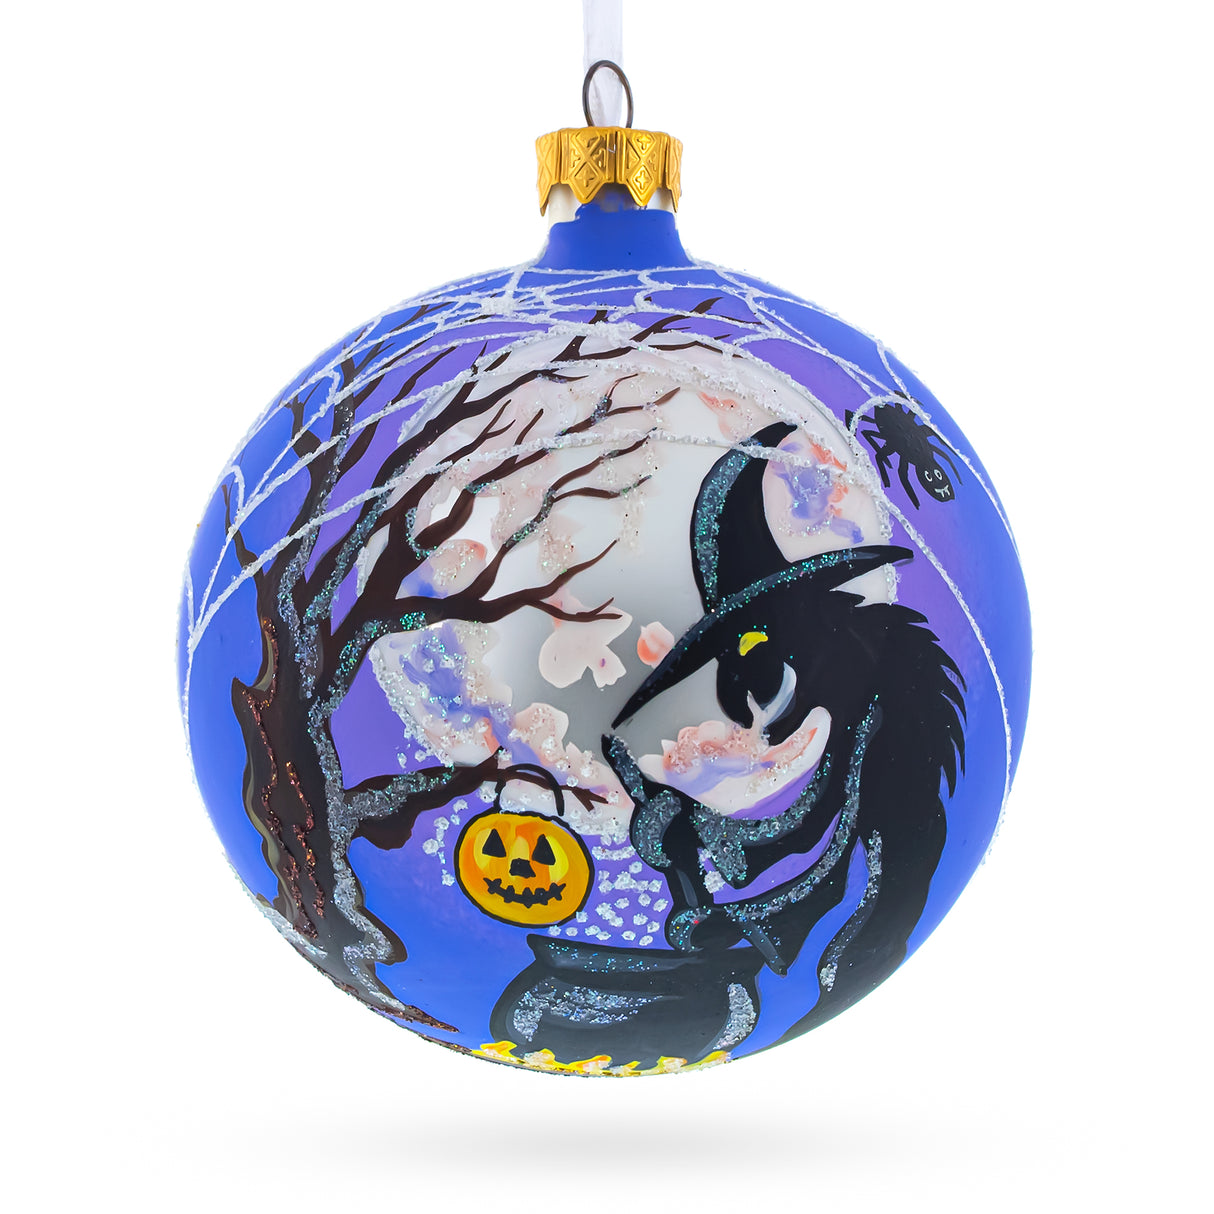 Glass Wickedly Delightful: The Witch on Halloween Glass Ball Christmas Ornament 4 Inches in Blue color Round